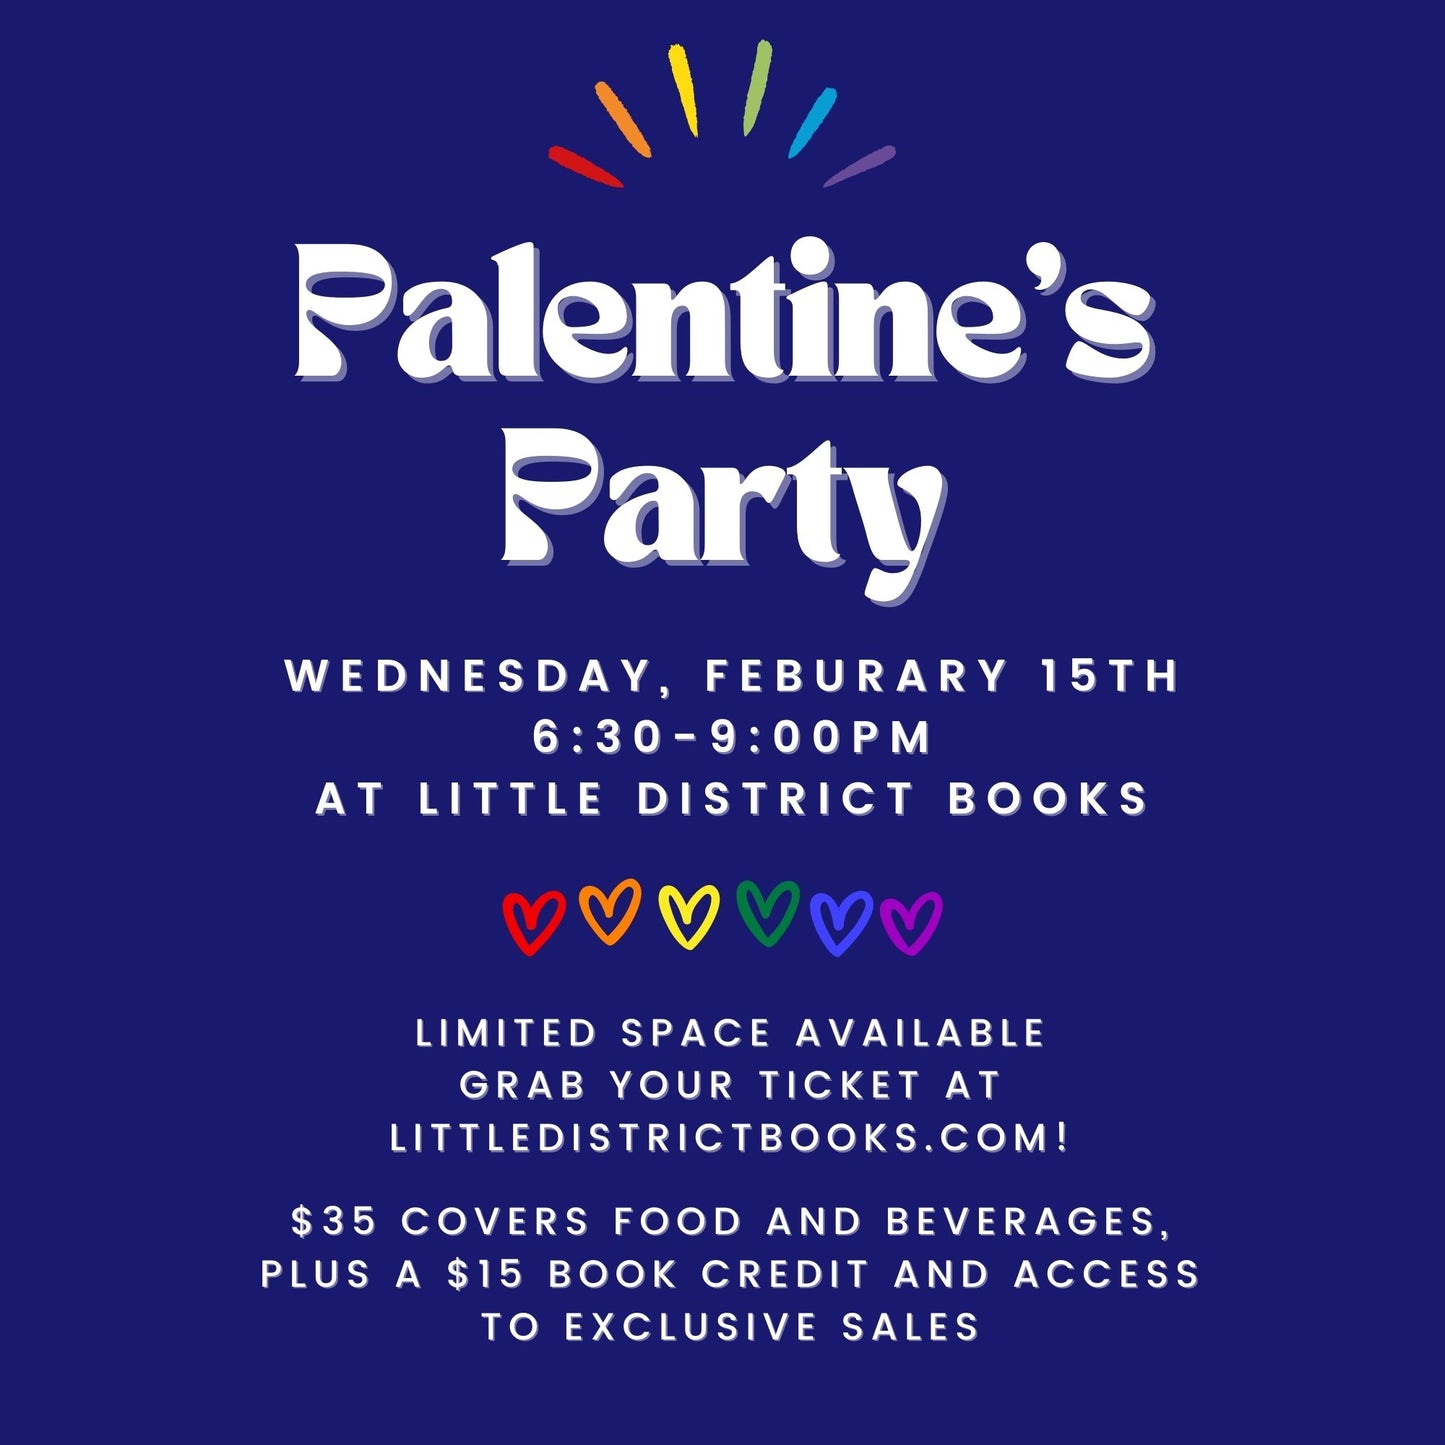 Palentine's Party at Little District Books